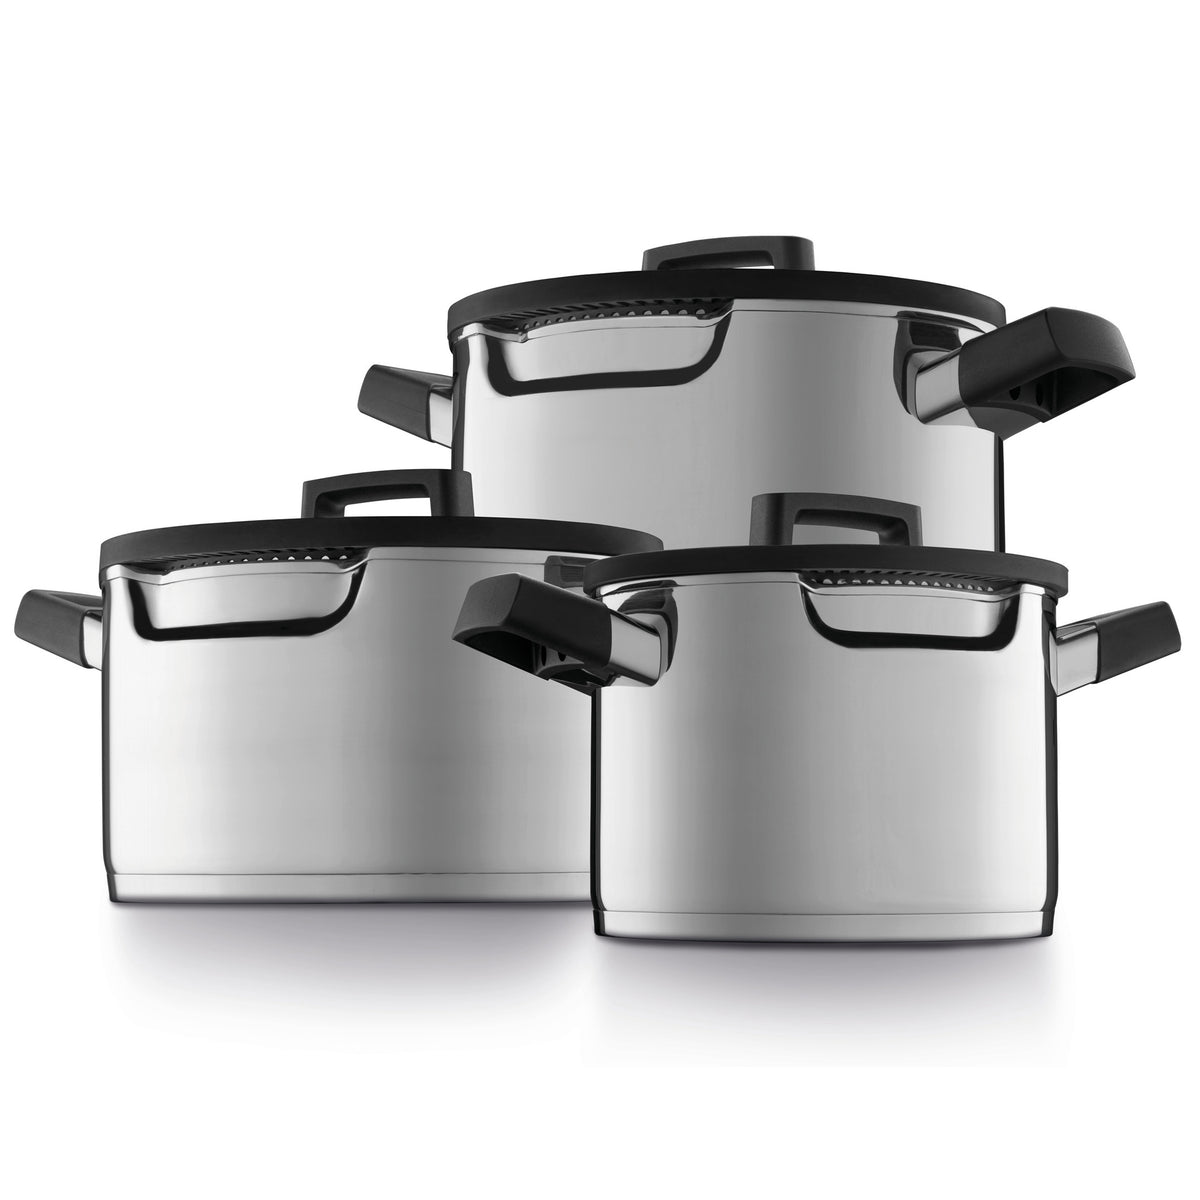 Berghoff 1100196 Stainless Steel Lunch Box, Black/Stainless Steel